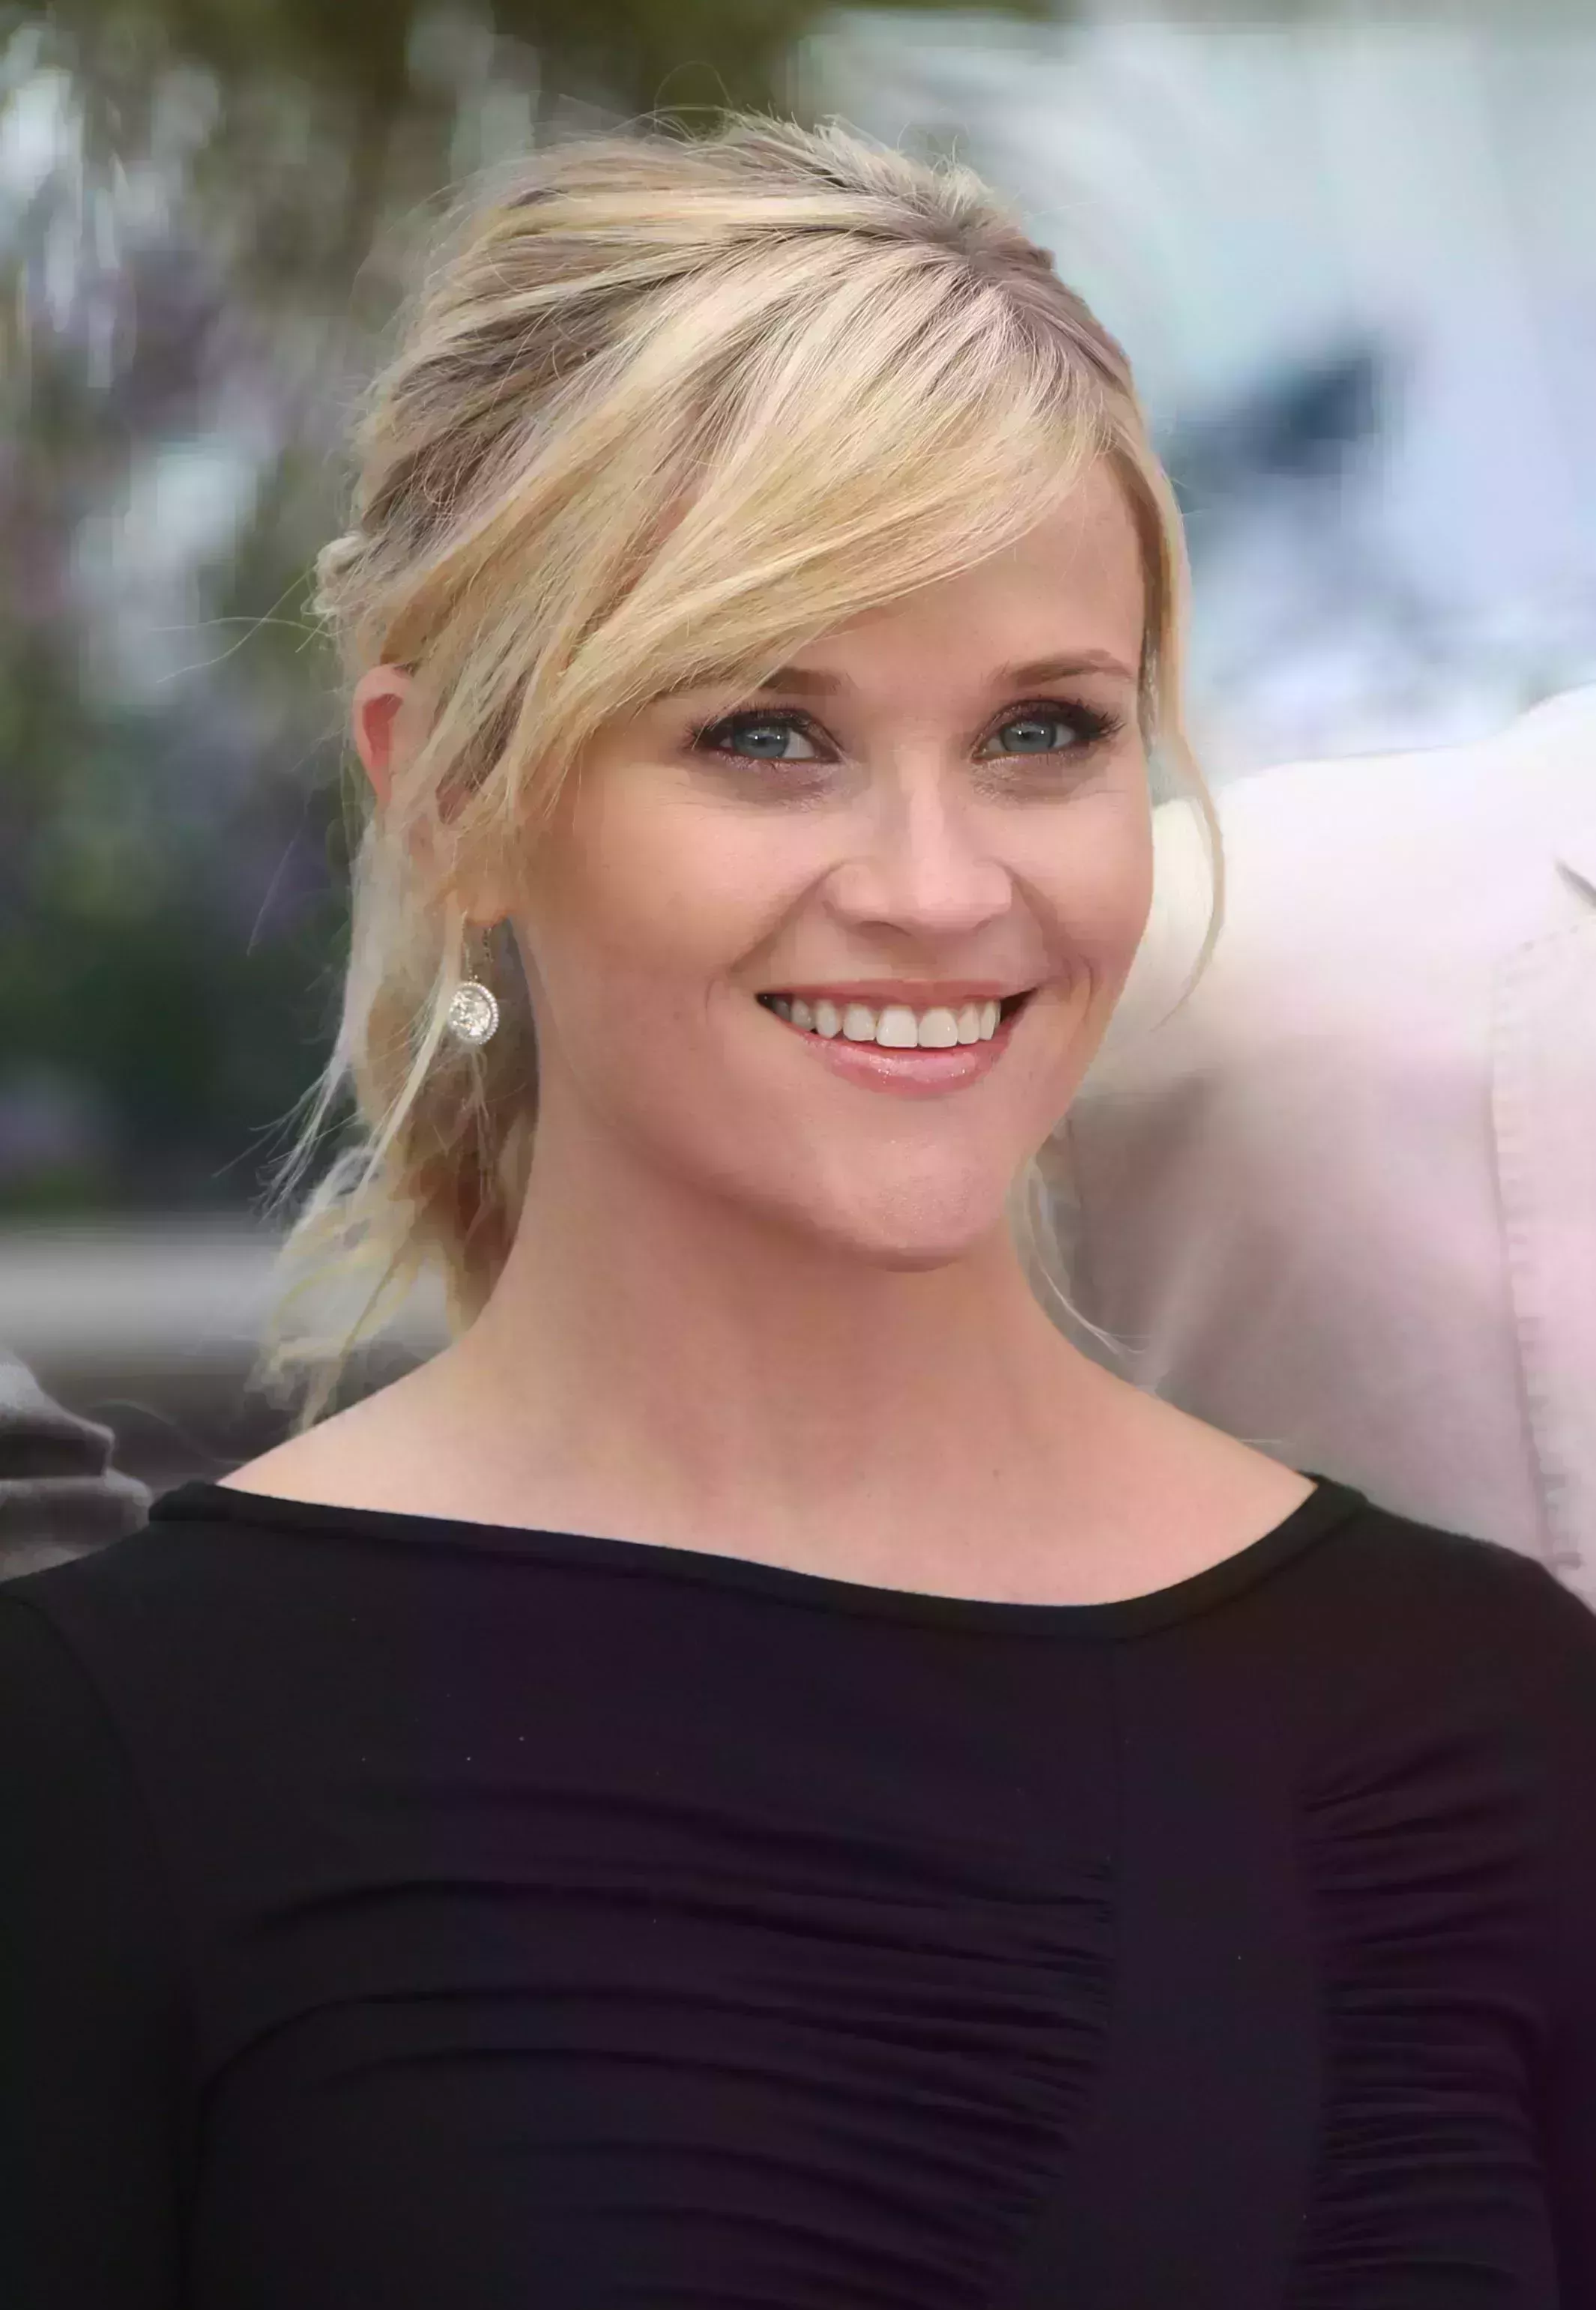 Reese Witherspoon’s Ponytail With Side Bangs